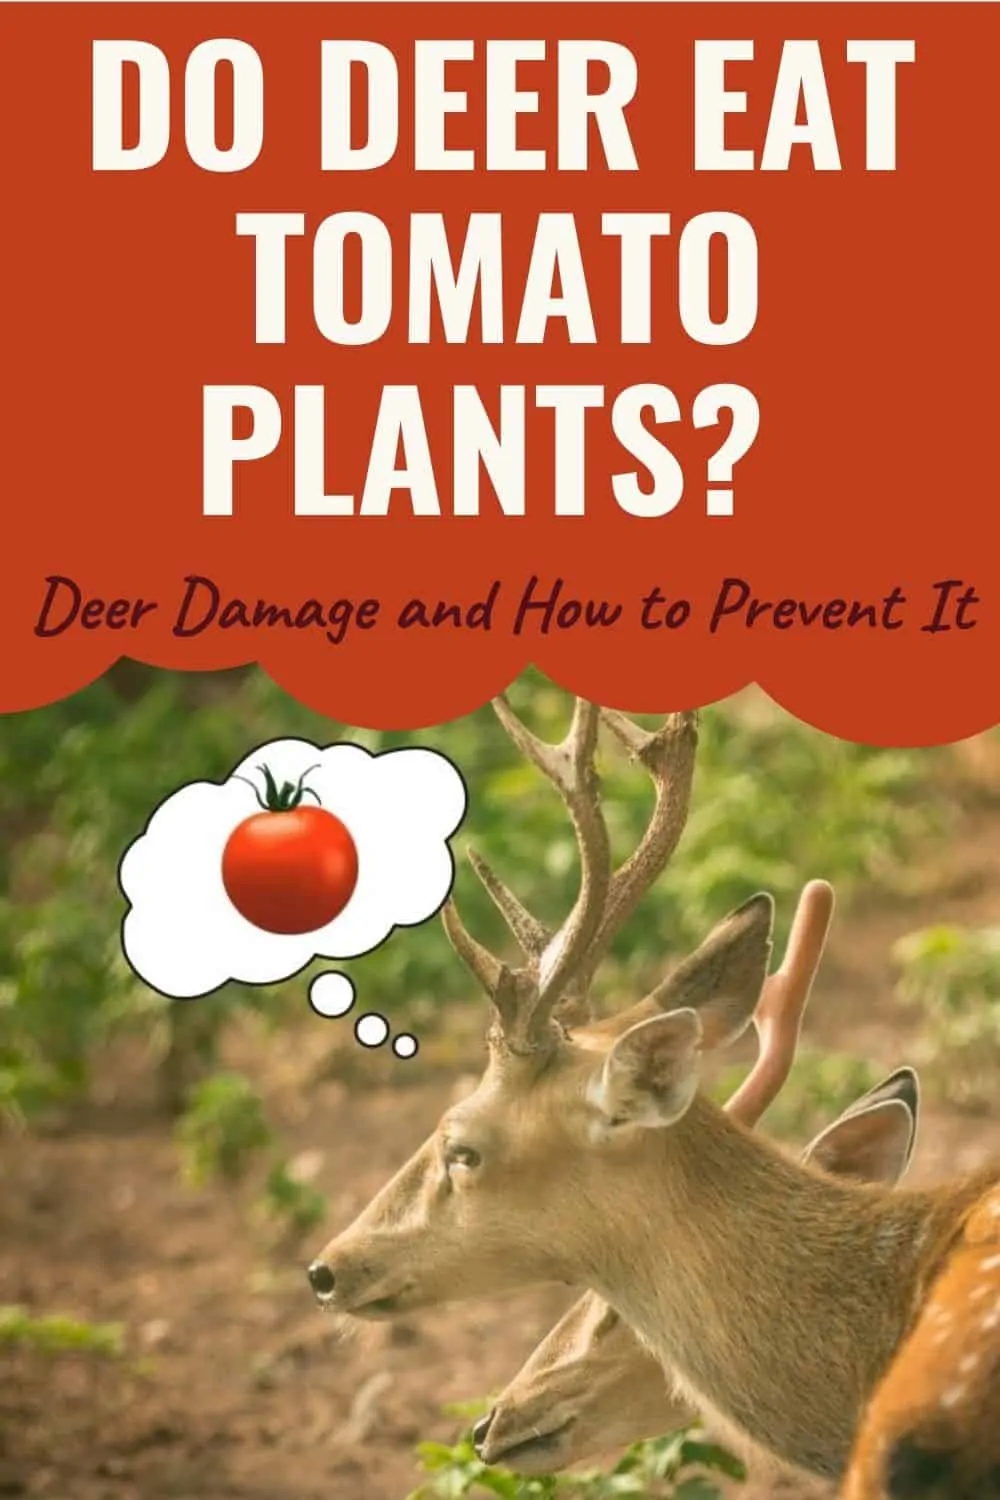 Do deer eat tomatoes and tomato plants?